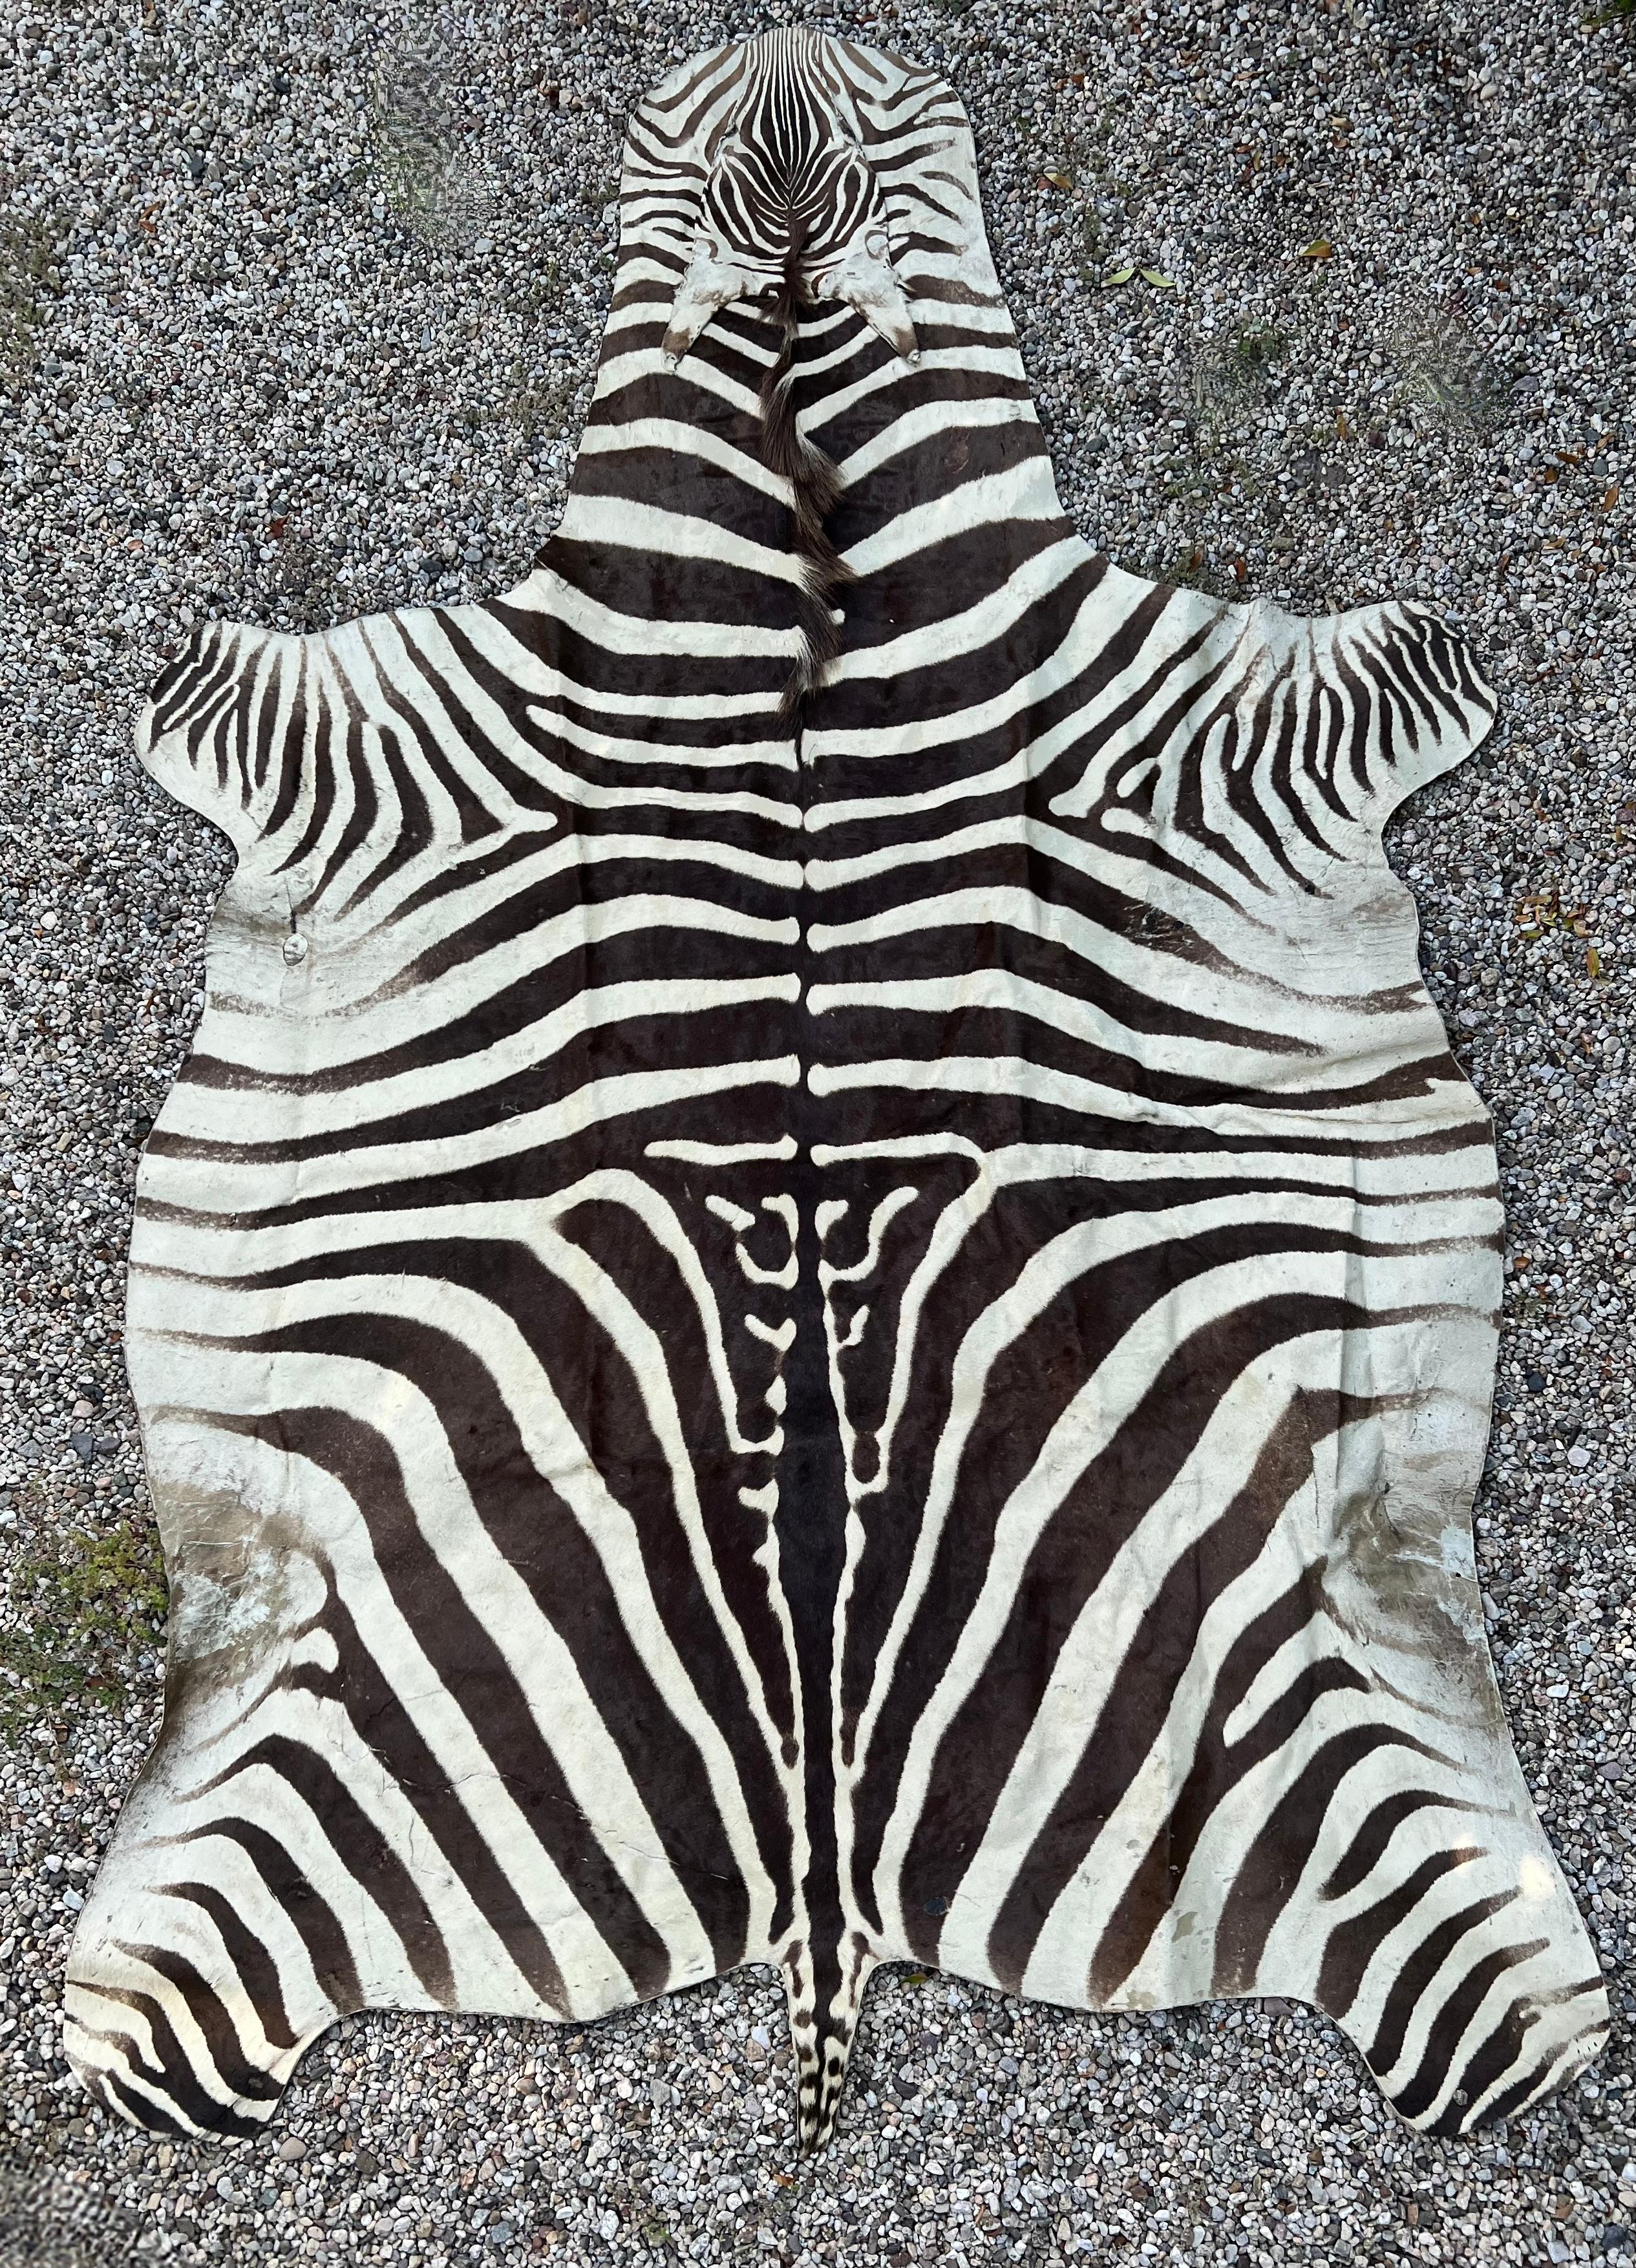 A gorgeous Zebra Hide Rug - a compliment to many settings and especially those with a Ralph Lauren statement.  

Animal hides bring great energy to a space and the design and pattern add a natural statement of organic textures within a space.

The